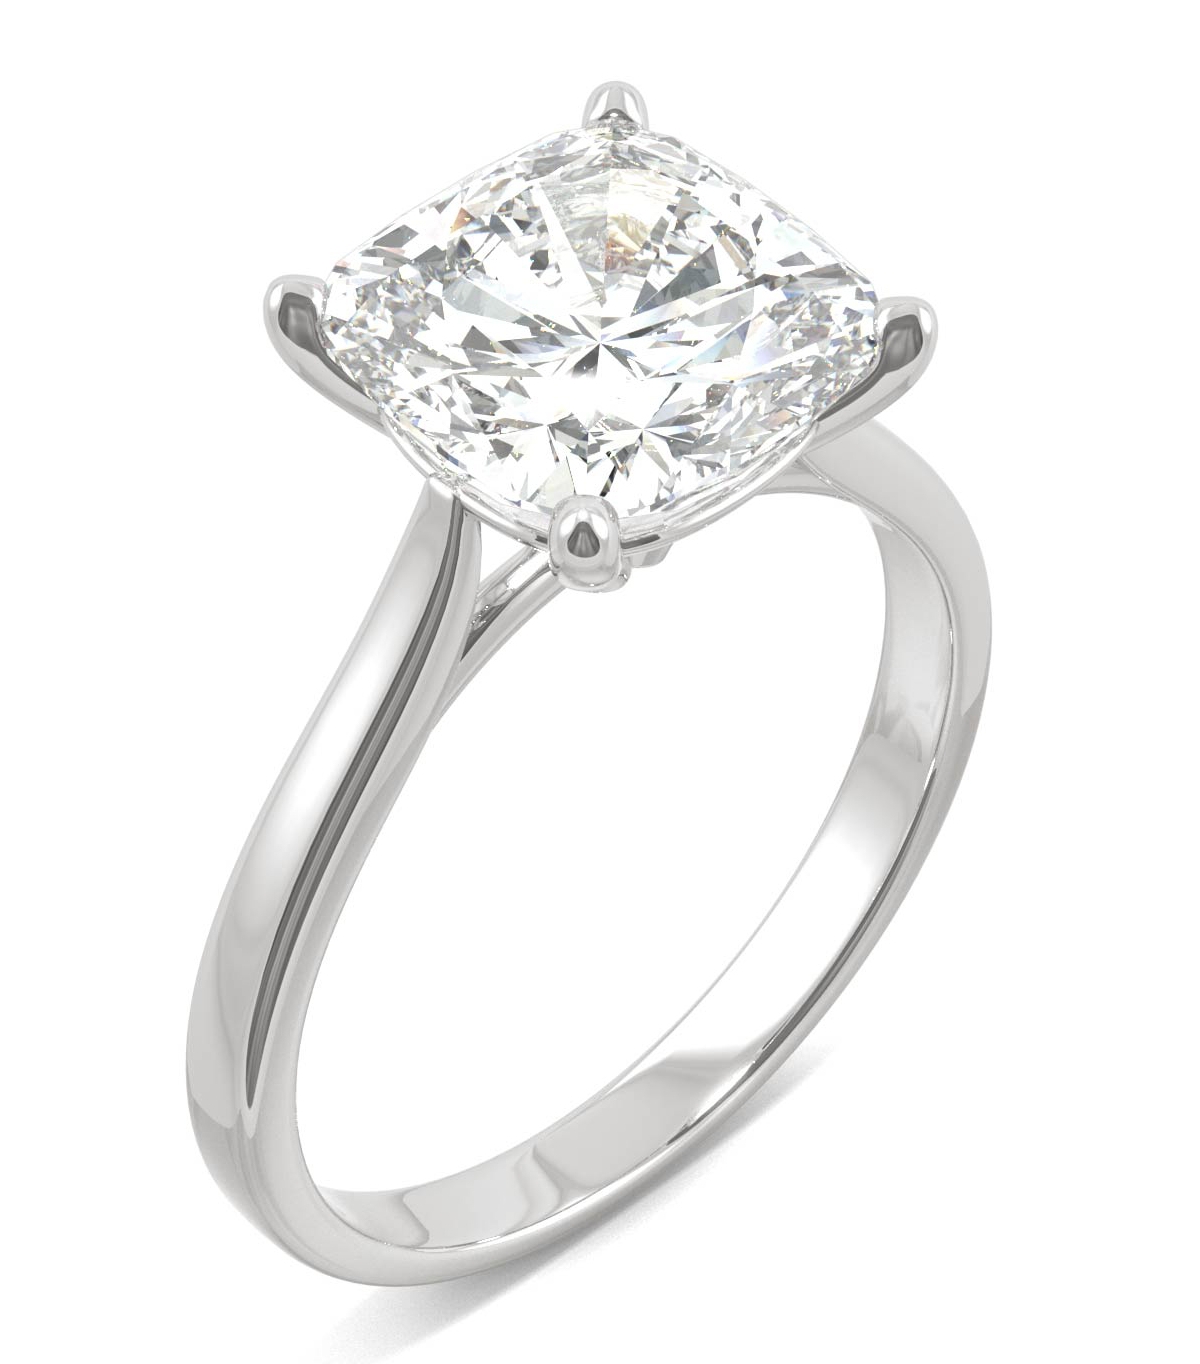 Moissanite Cushion Solitaire Ring (3-1/3 ct. tw.) in 14k White, Yellow or Rose Gold - White Gold